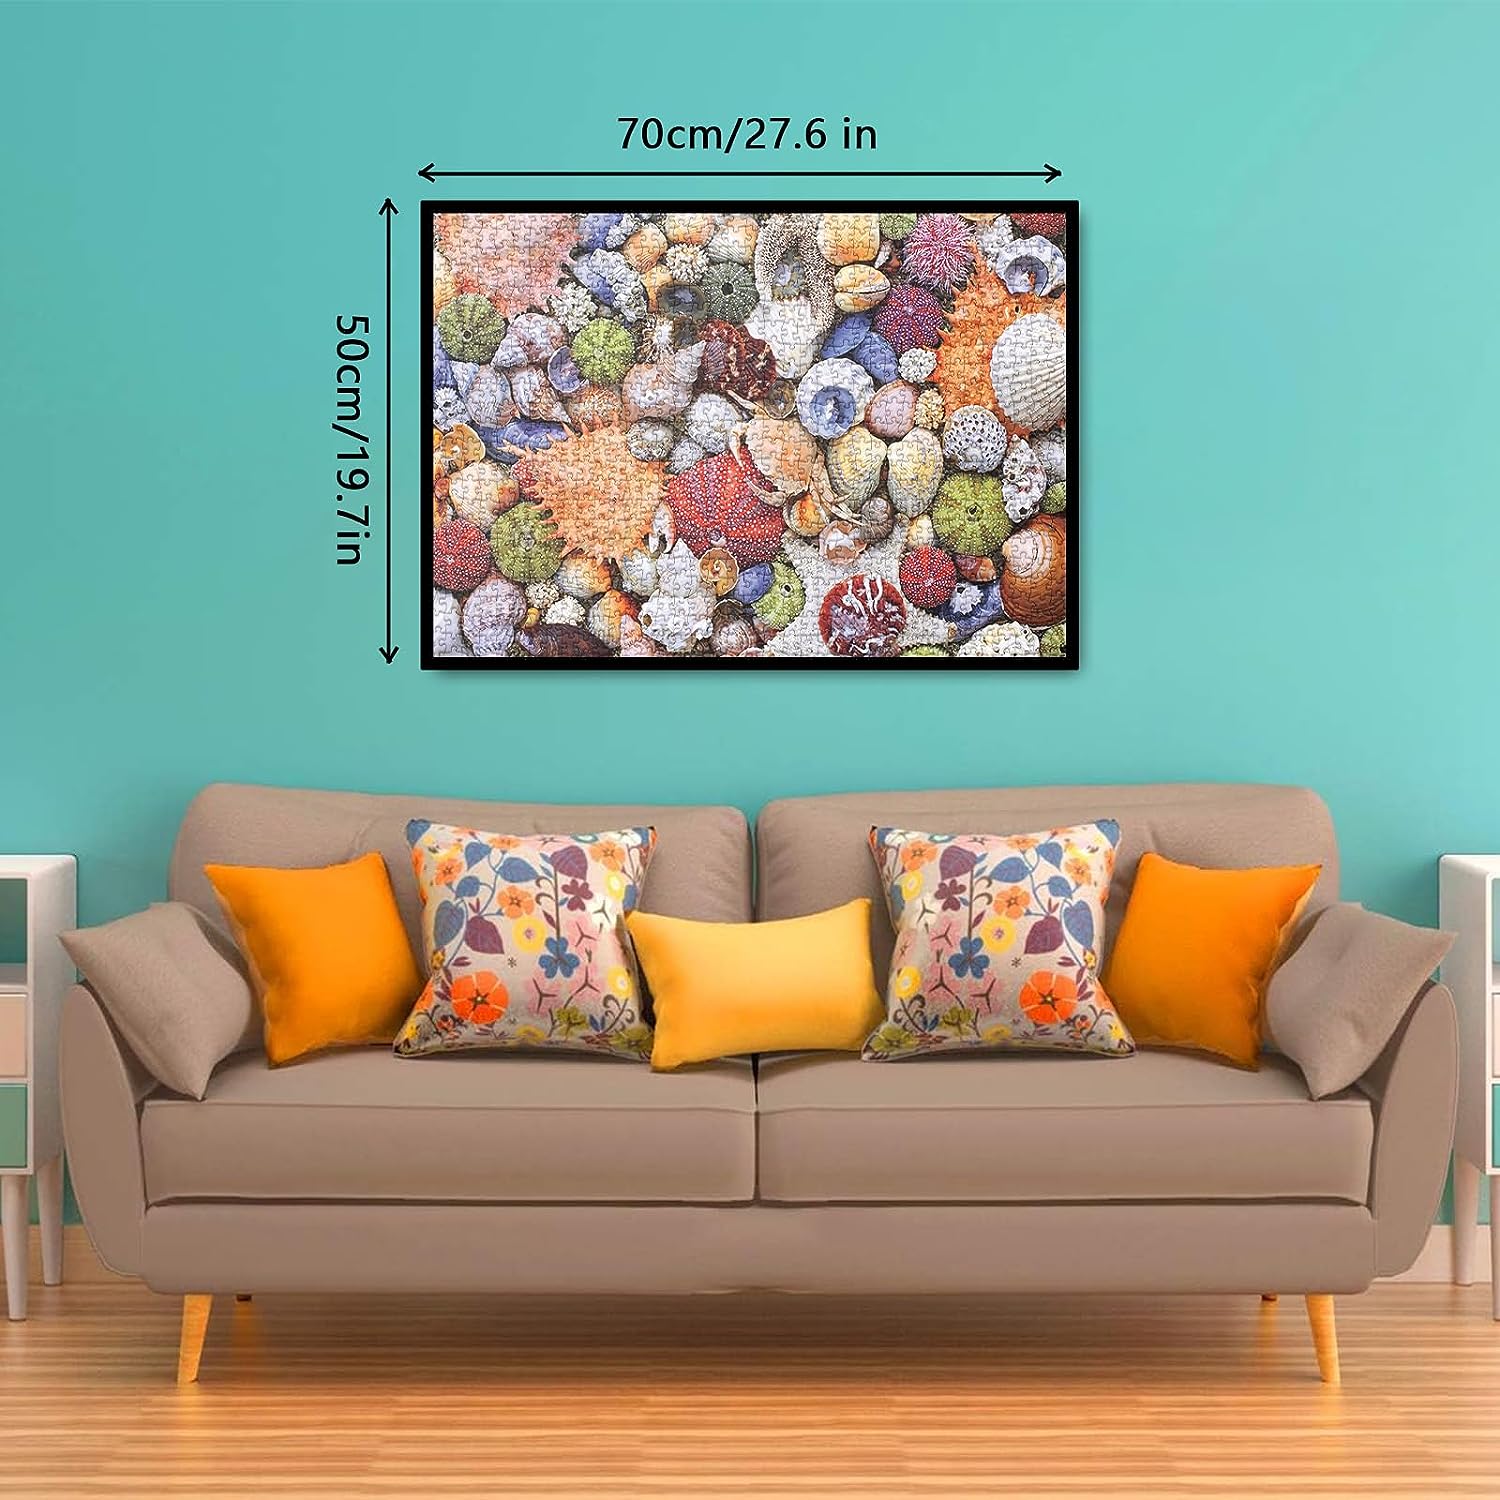 Colorful Seashell Jigsaw Puzzle 1000 Pieces